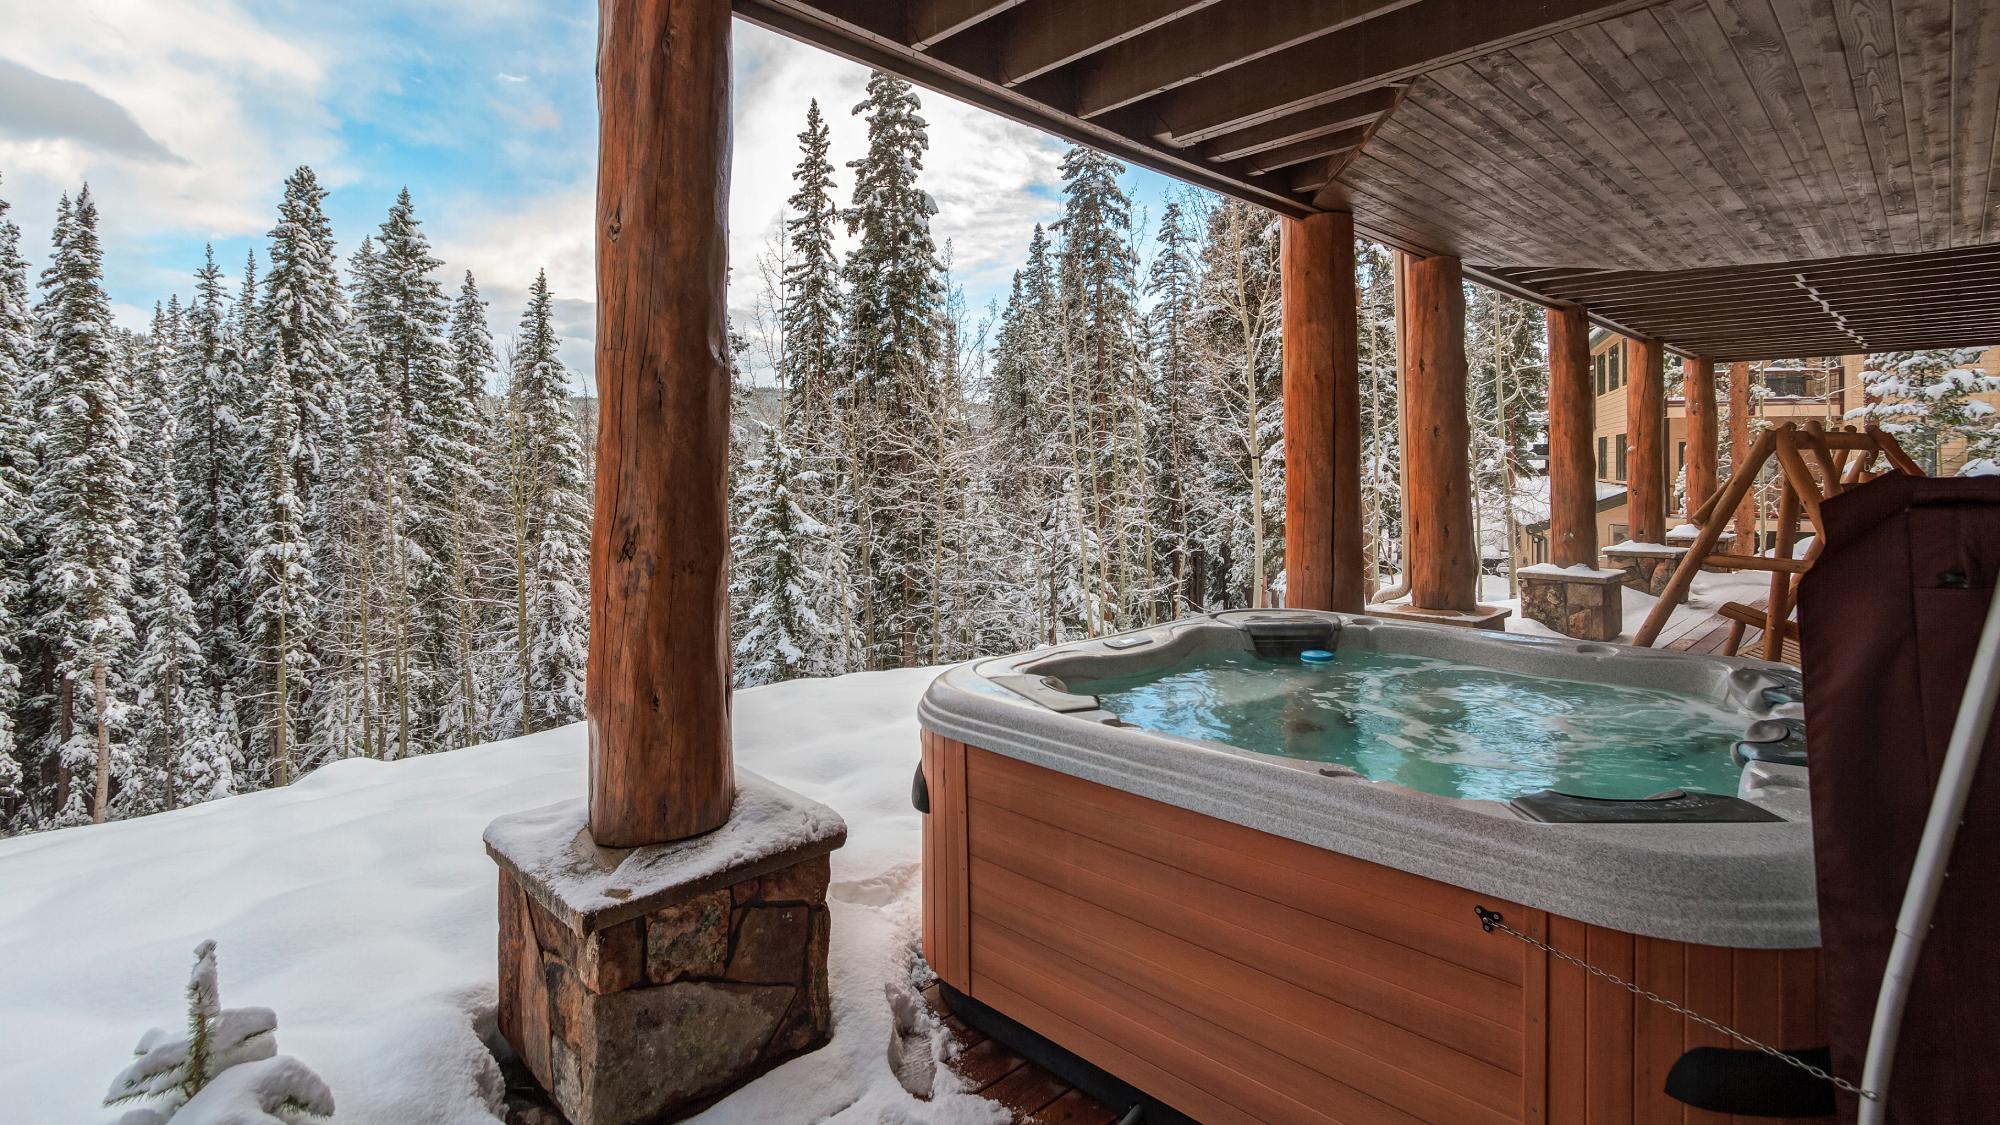 Take in all the views during a soak in your private hot tub